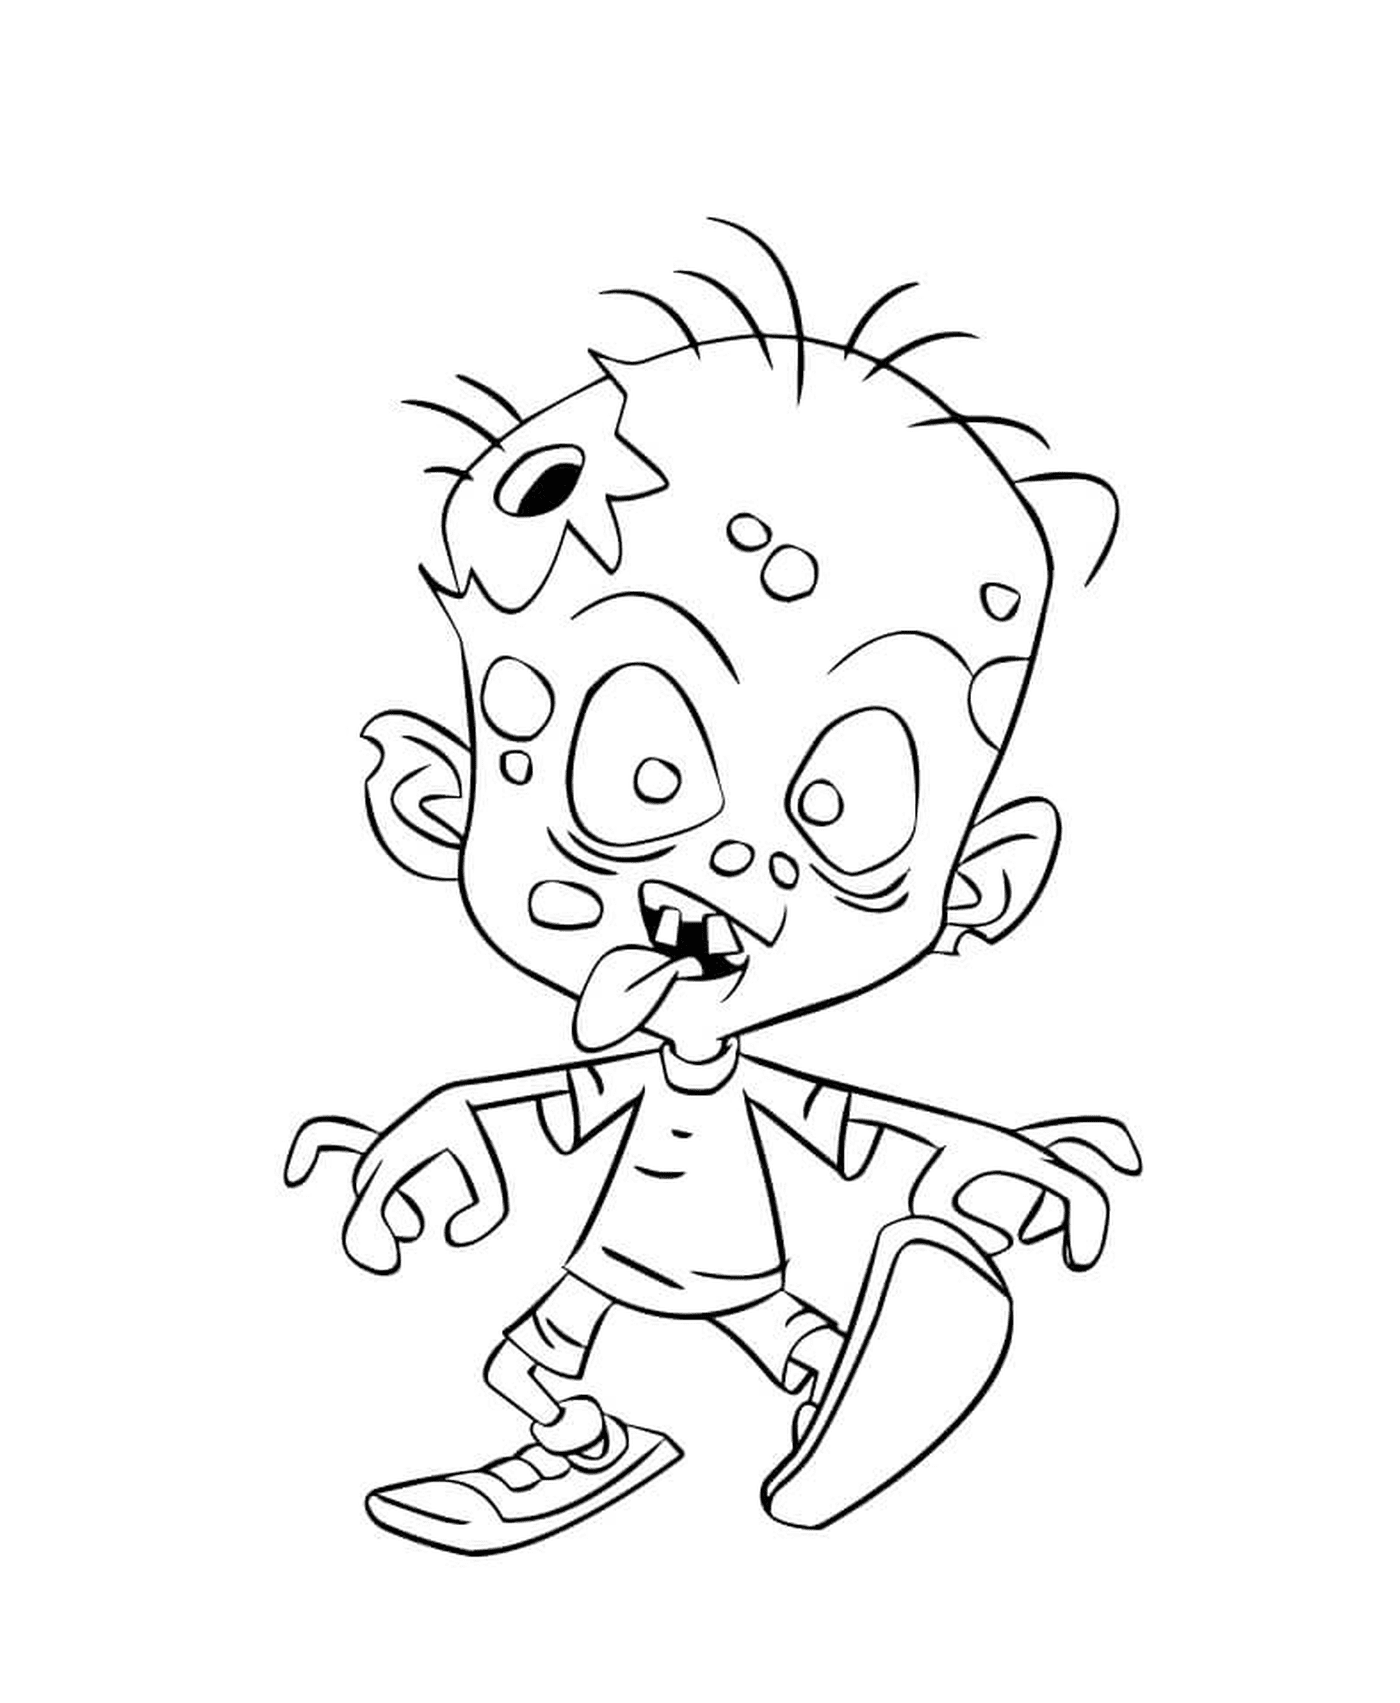  A baby zombie child 